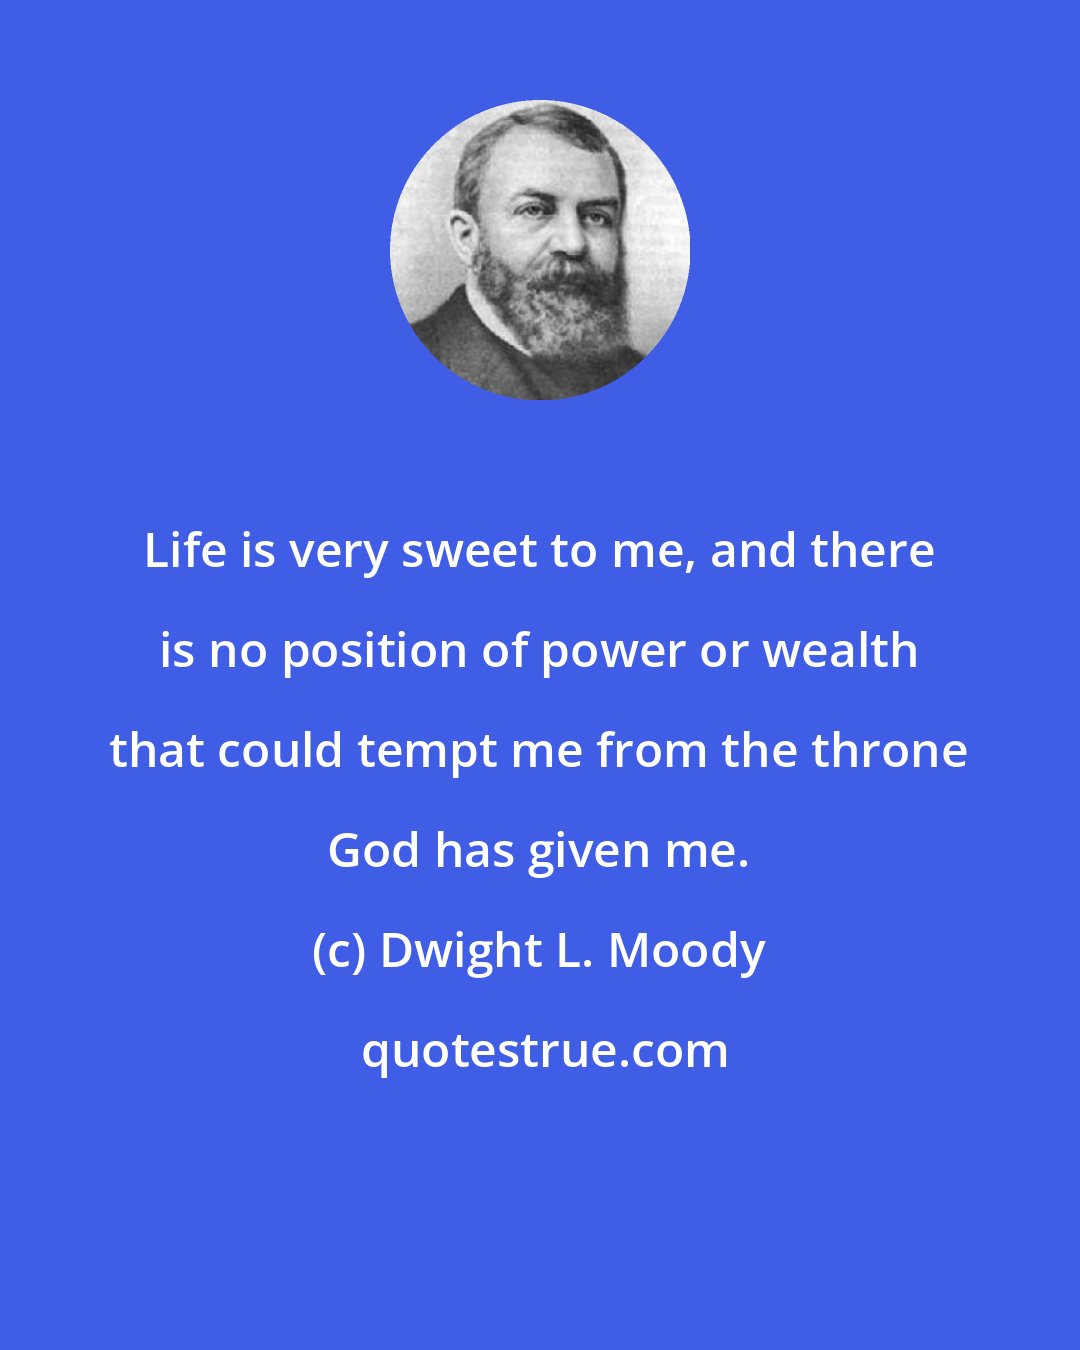 Dwight L. Moody: Life is very sweet to me, and there is no position of power or wealth that could tempt me from the throne God has given me.